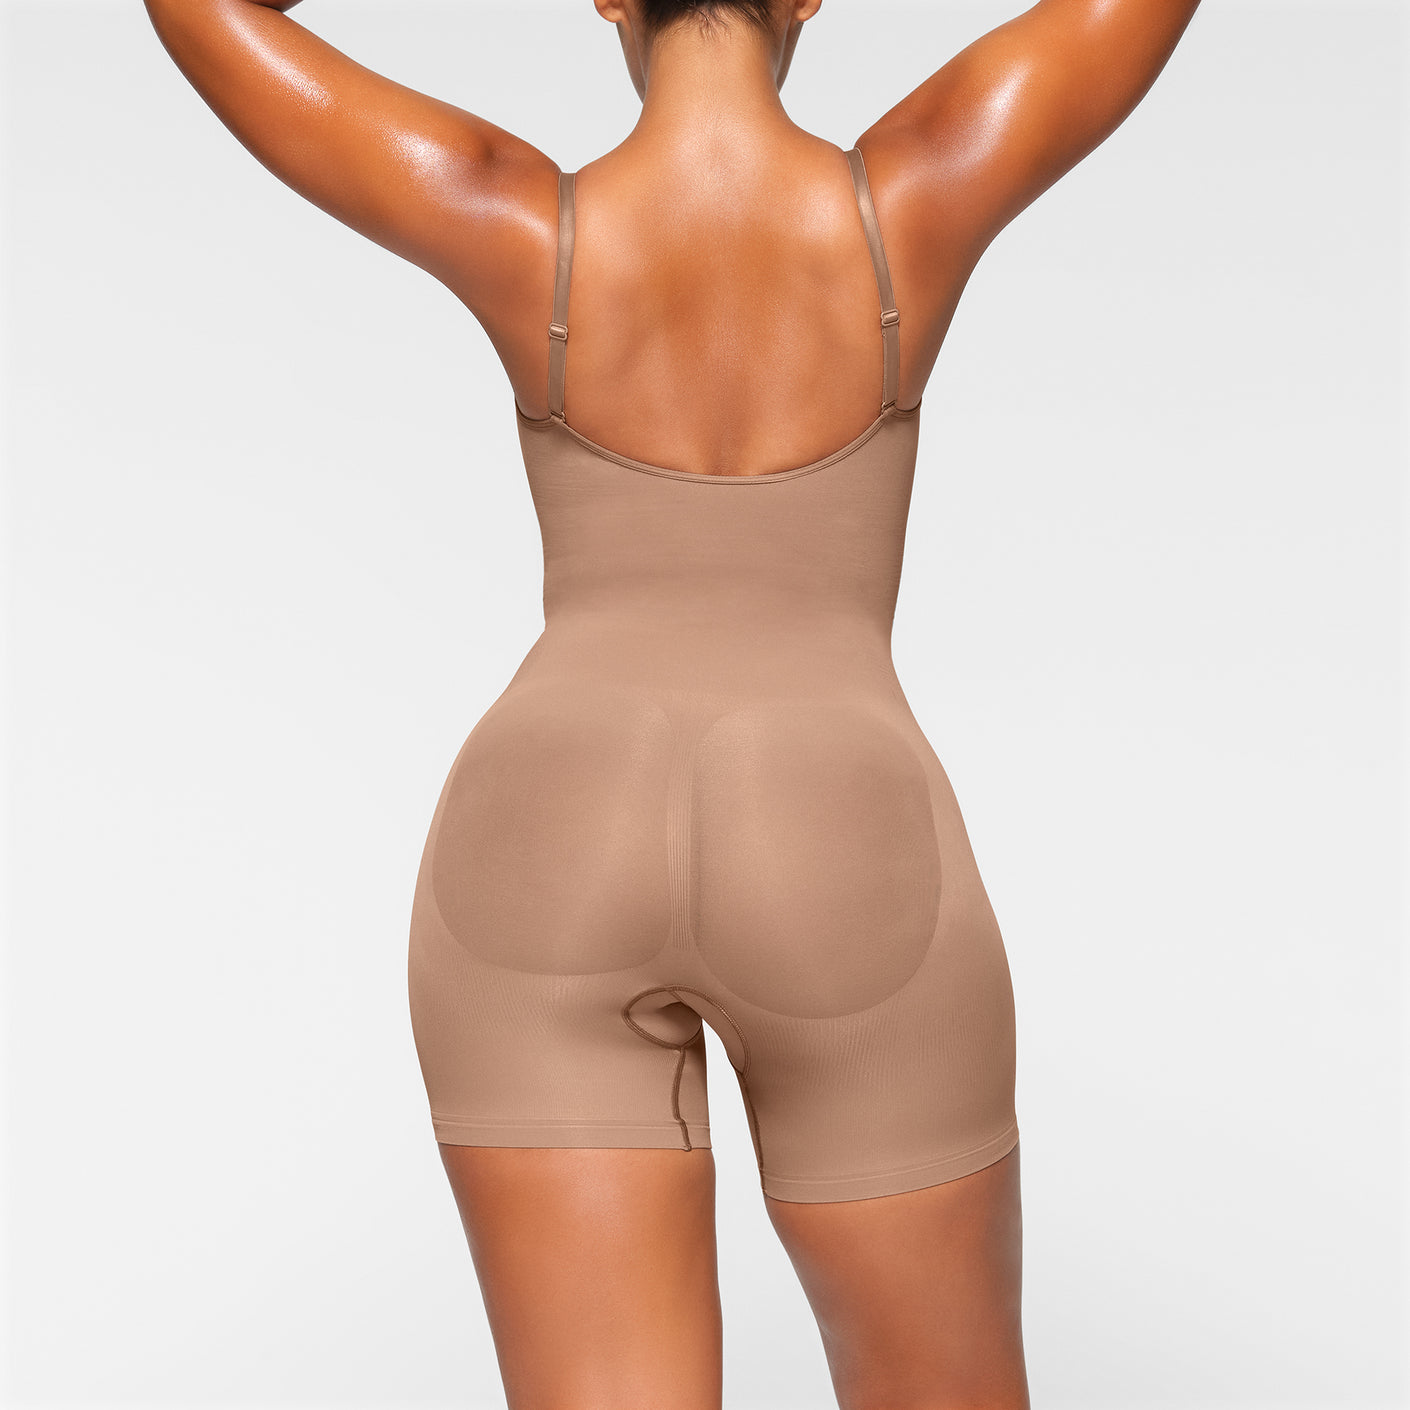 SKIMS Sculpting Seamless Mid-Thigh NWOT Bodysuit 2X/3X Size undefined - $64  - From Cutie